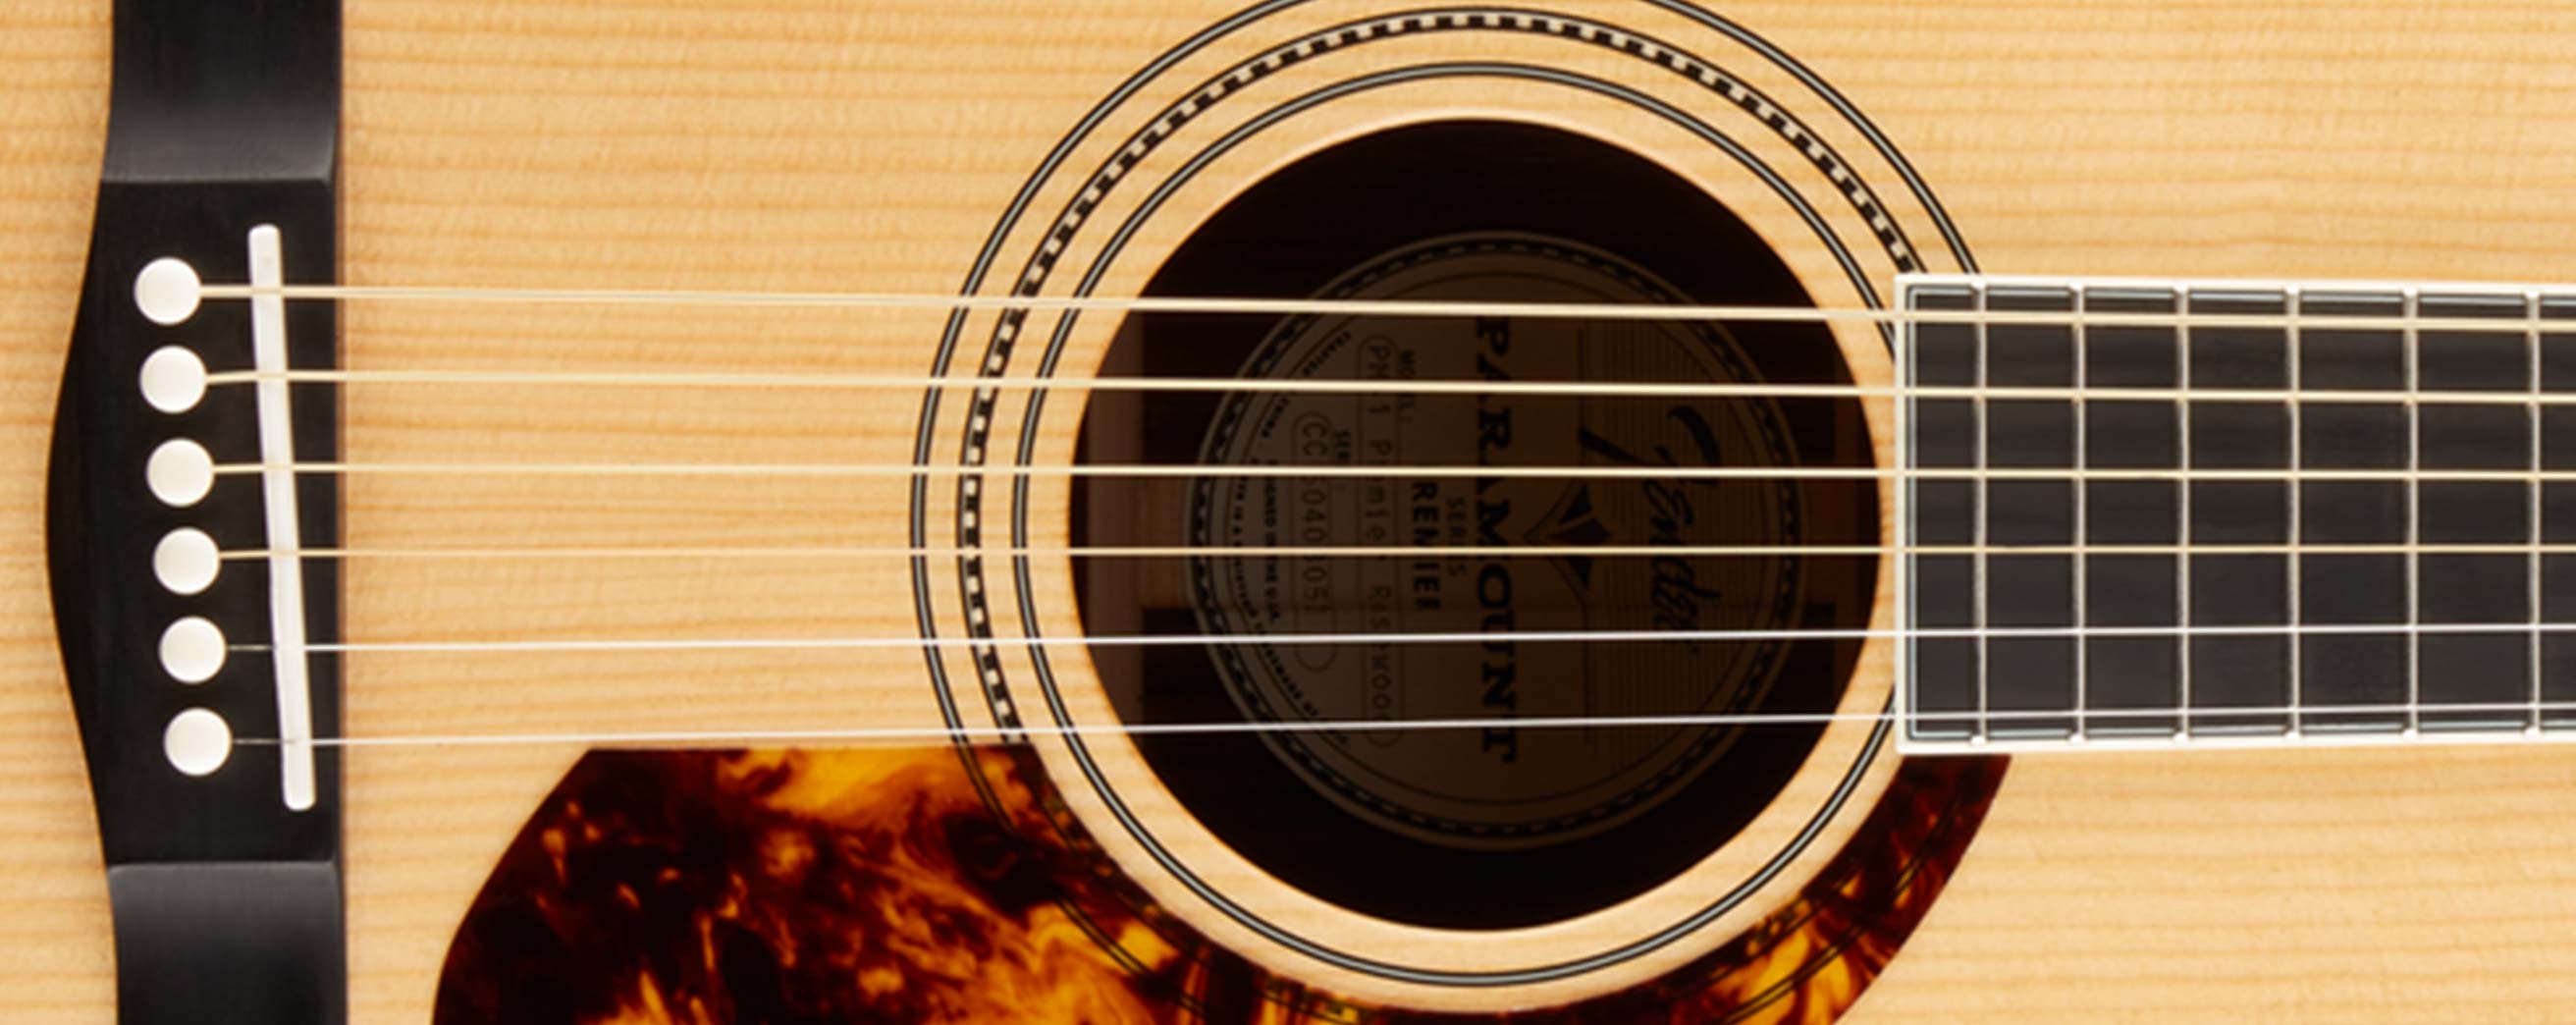 What Strings Are On An Acoustic Guitar